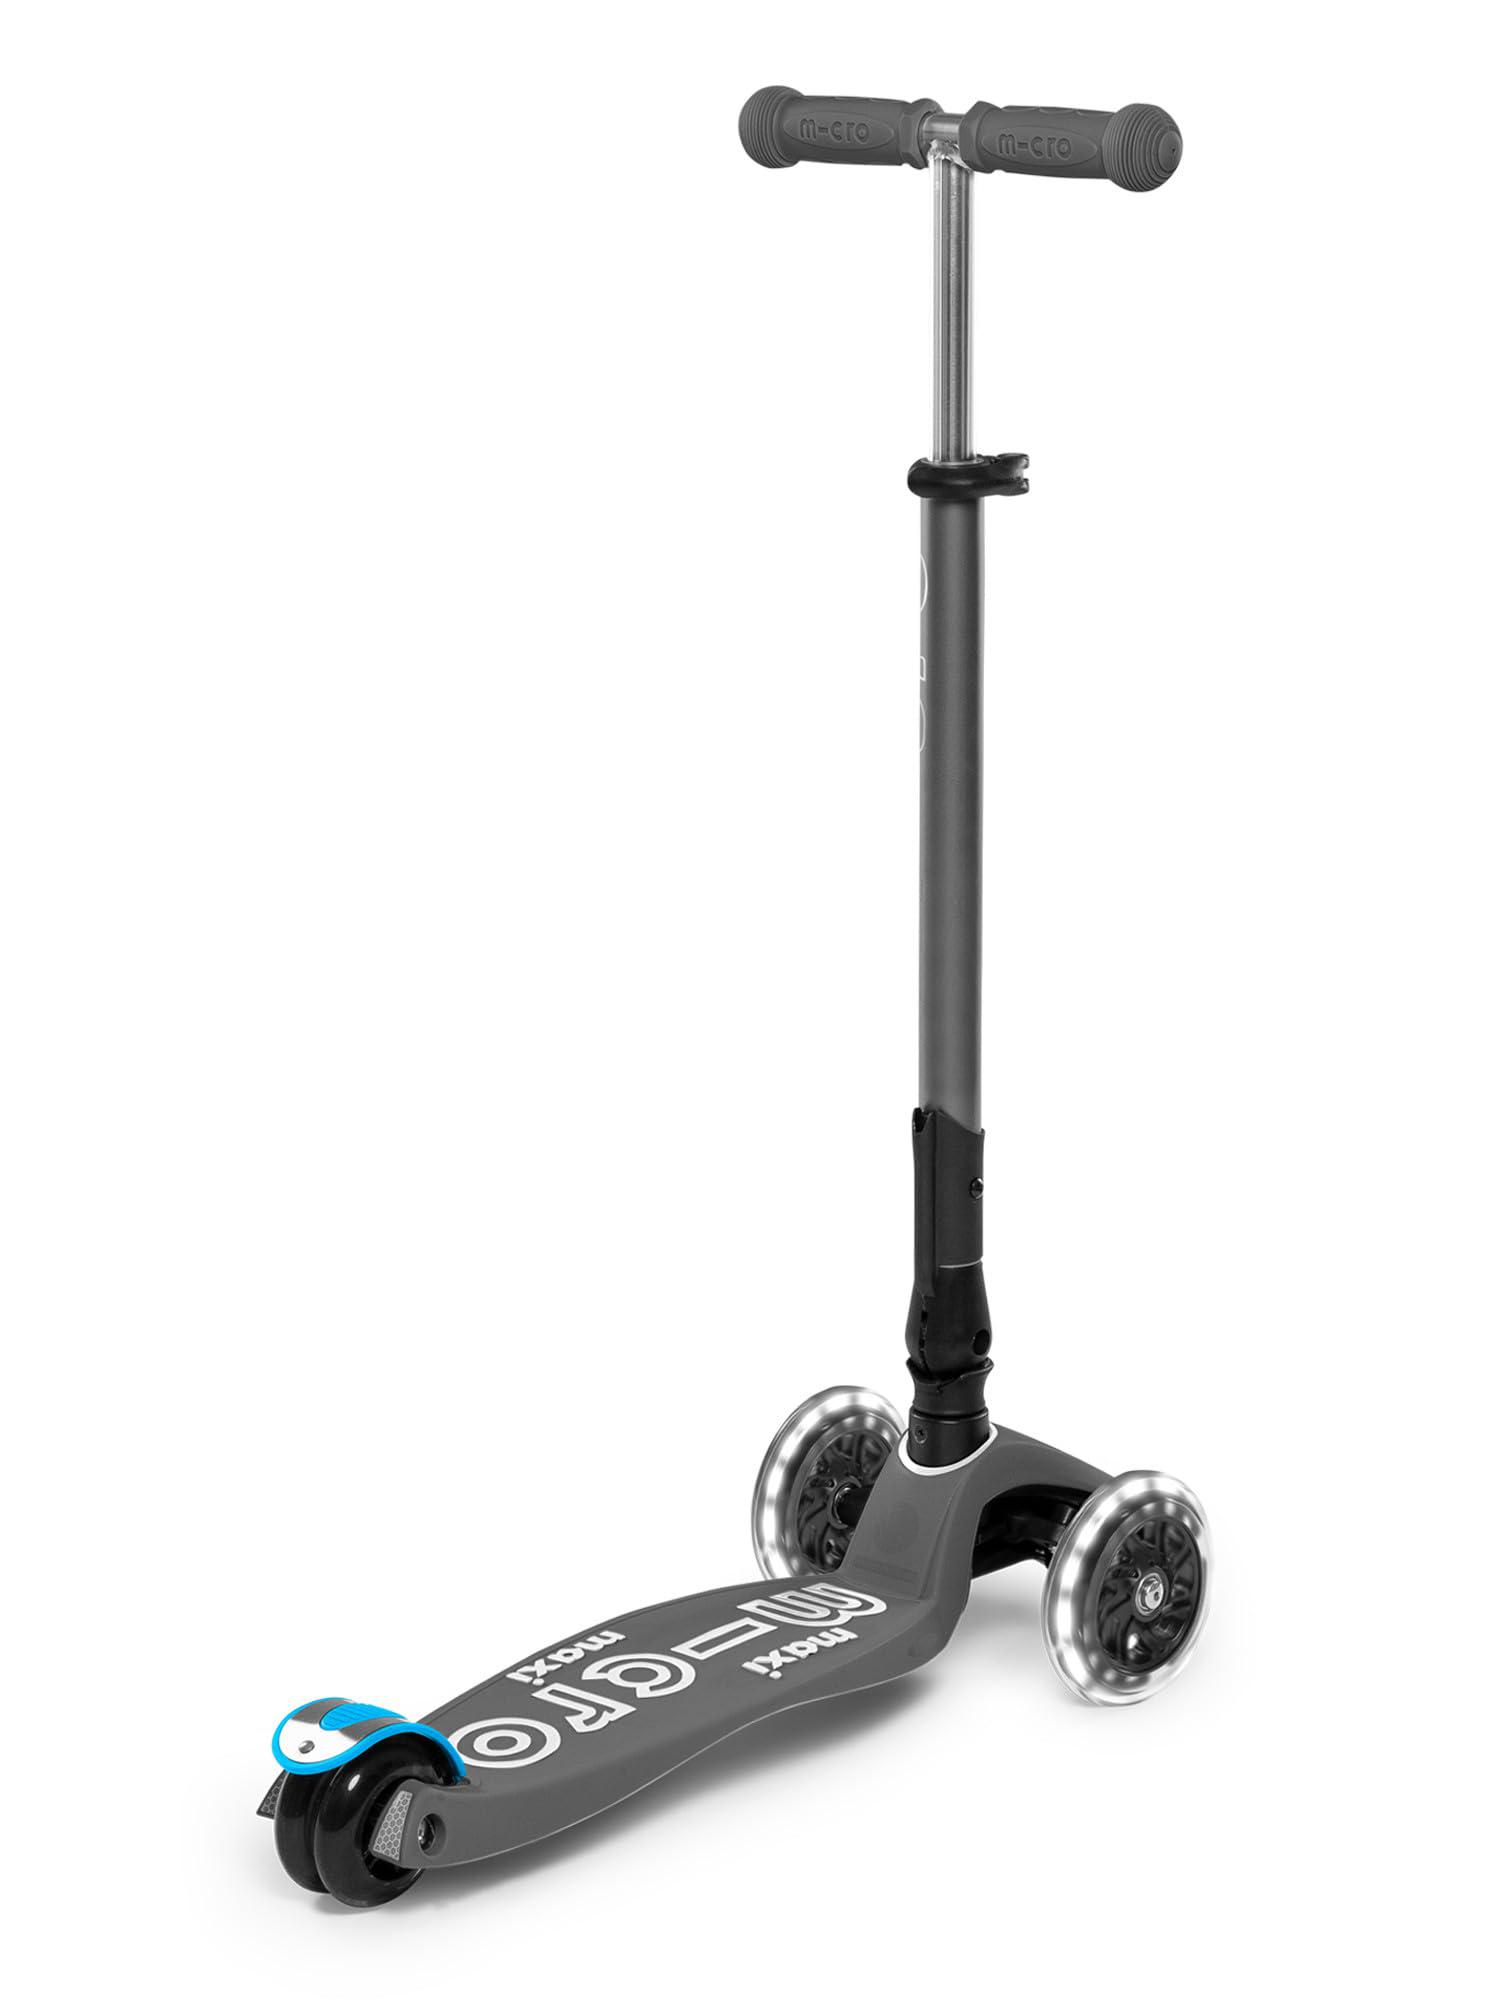 micro kickboard - maxi deluxe foldable led - three wheeled, lean-to-steer, fold-to-carry swiss-designed micro scooter for kid